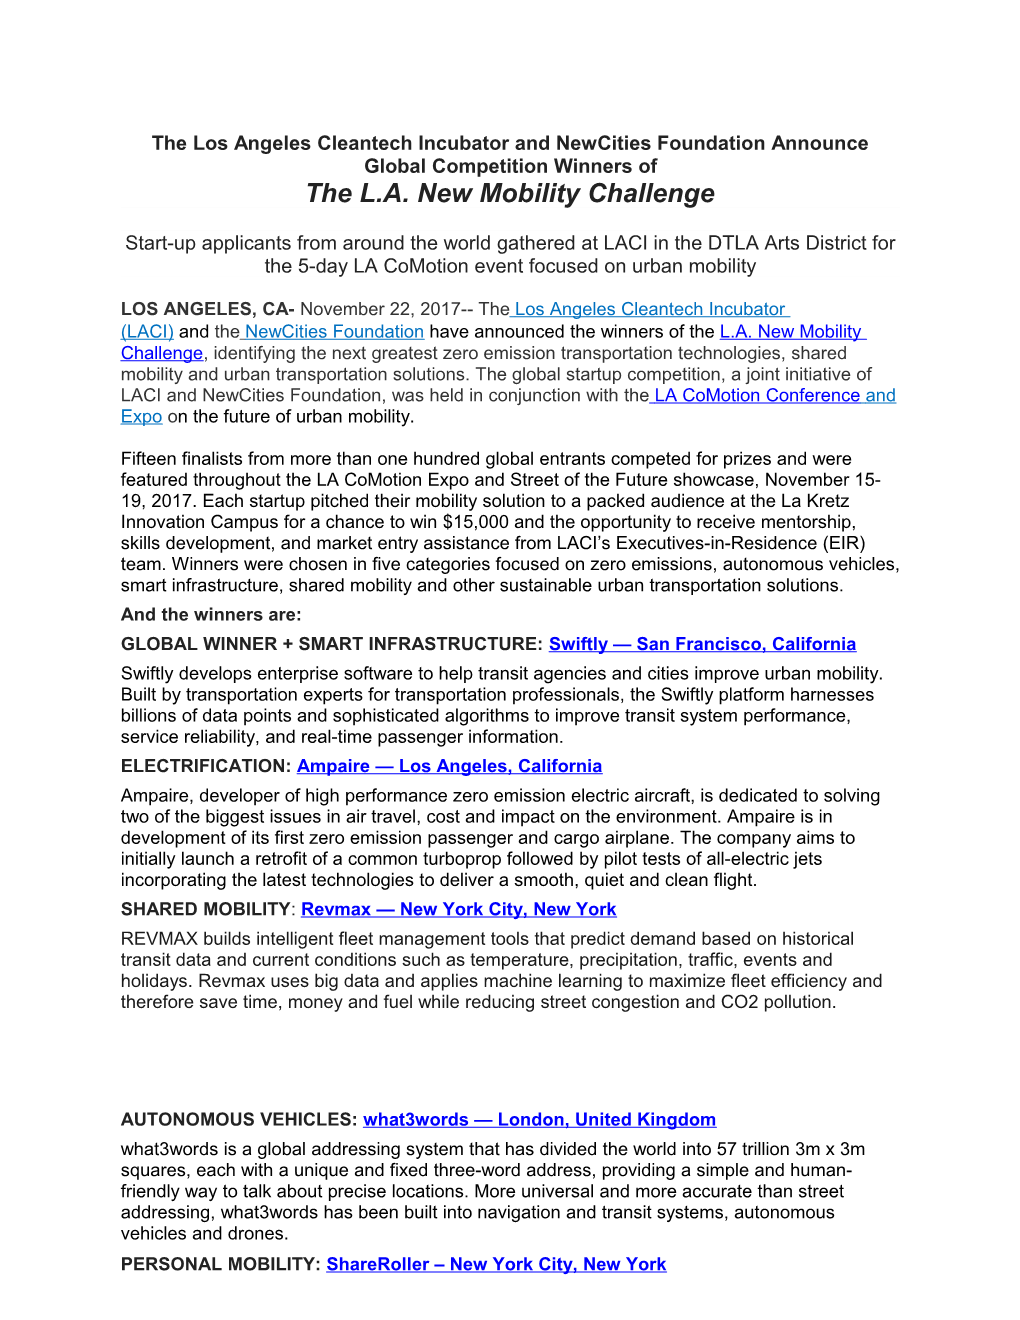 The L.A. New Mobility Challenge